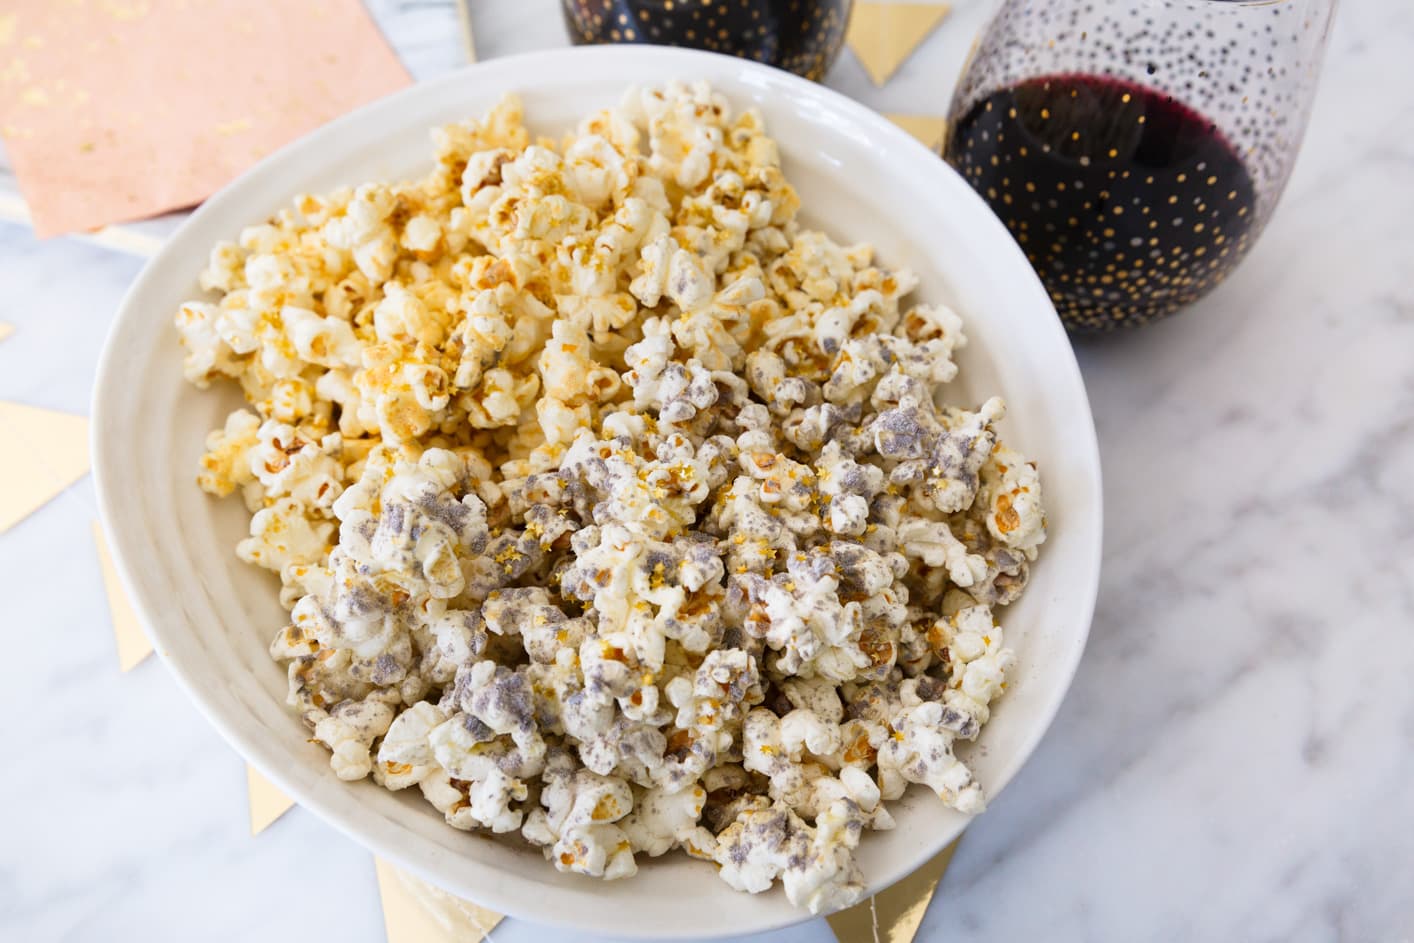 Louise Roe Glitter Popcorn Recipe For An Oscars Viewing Party